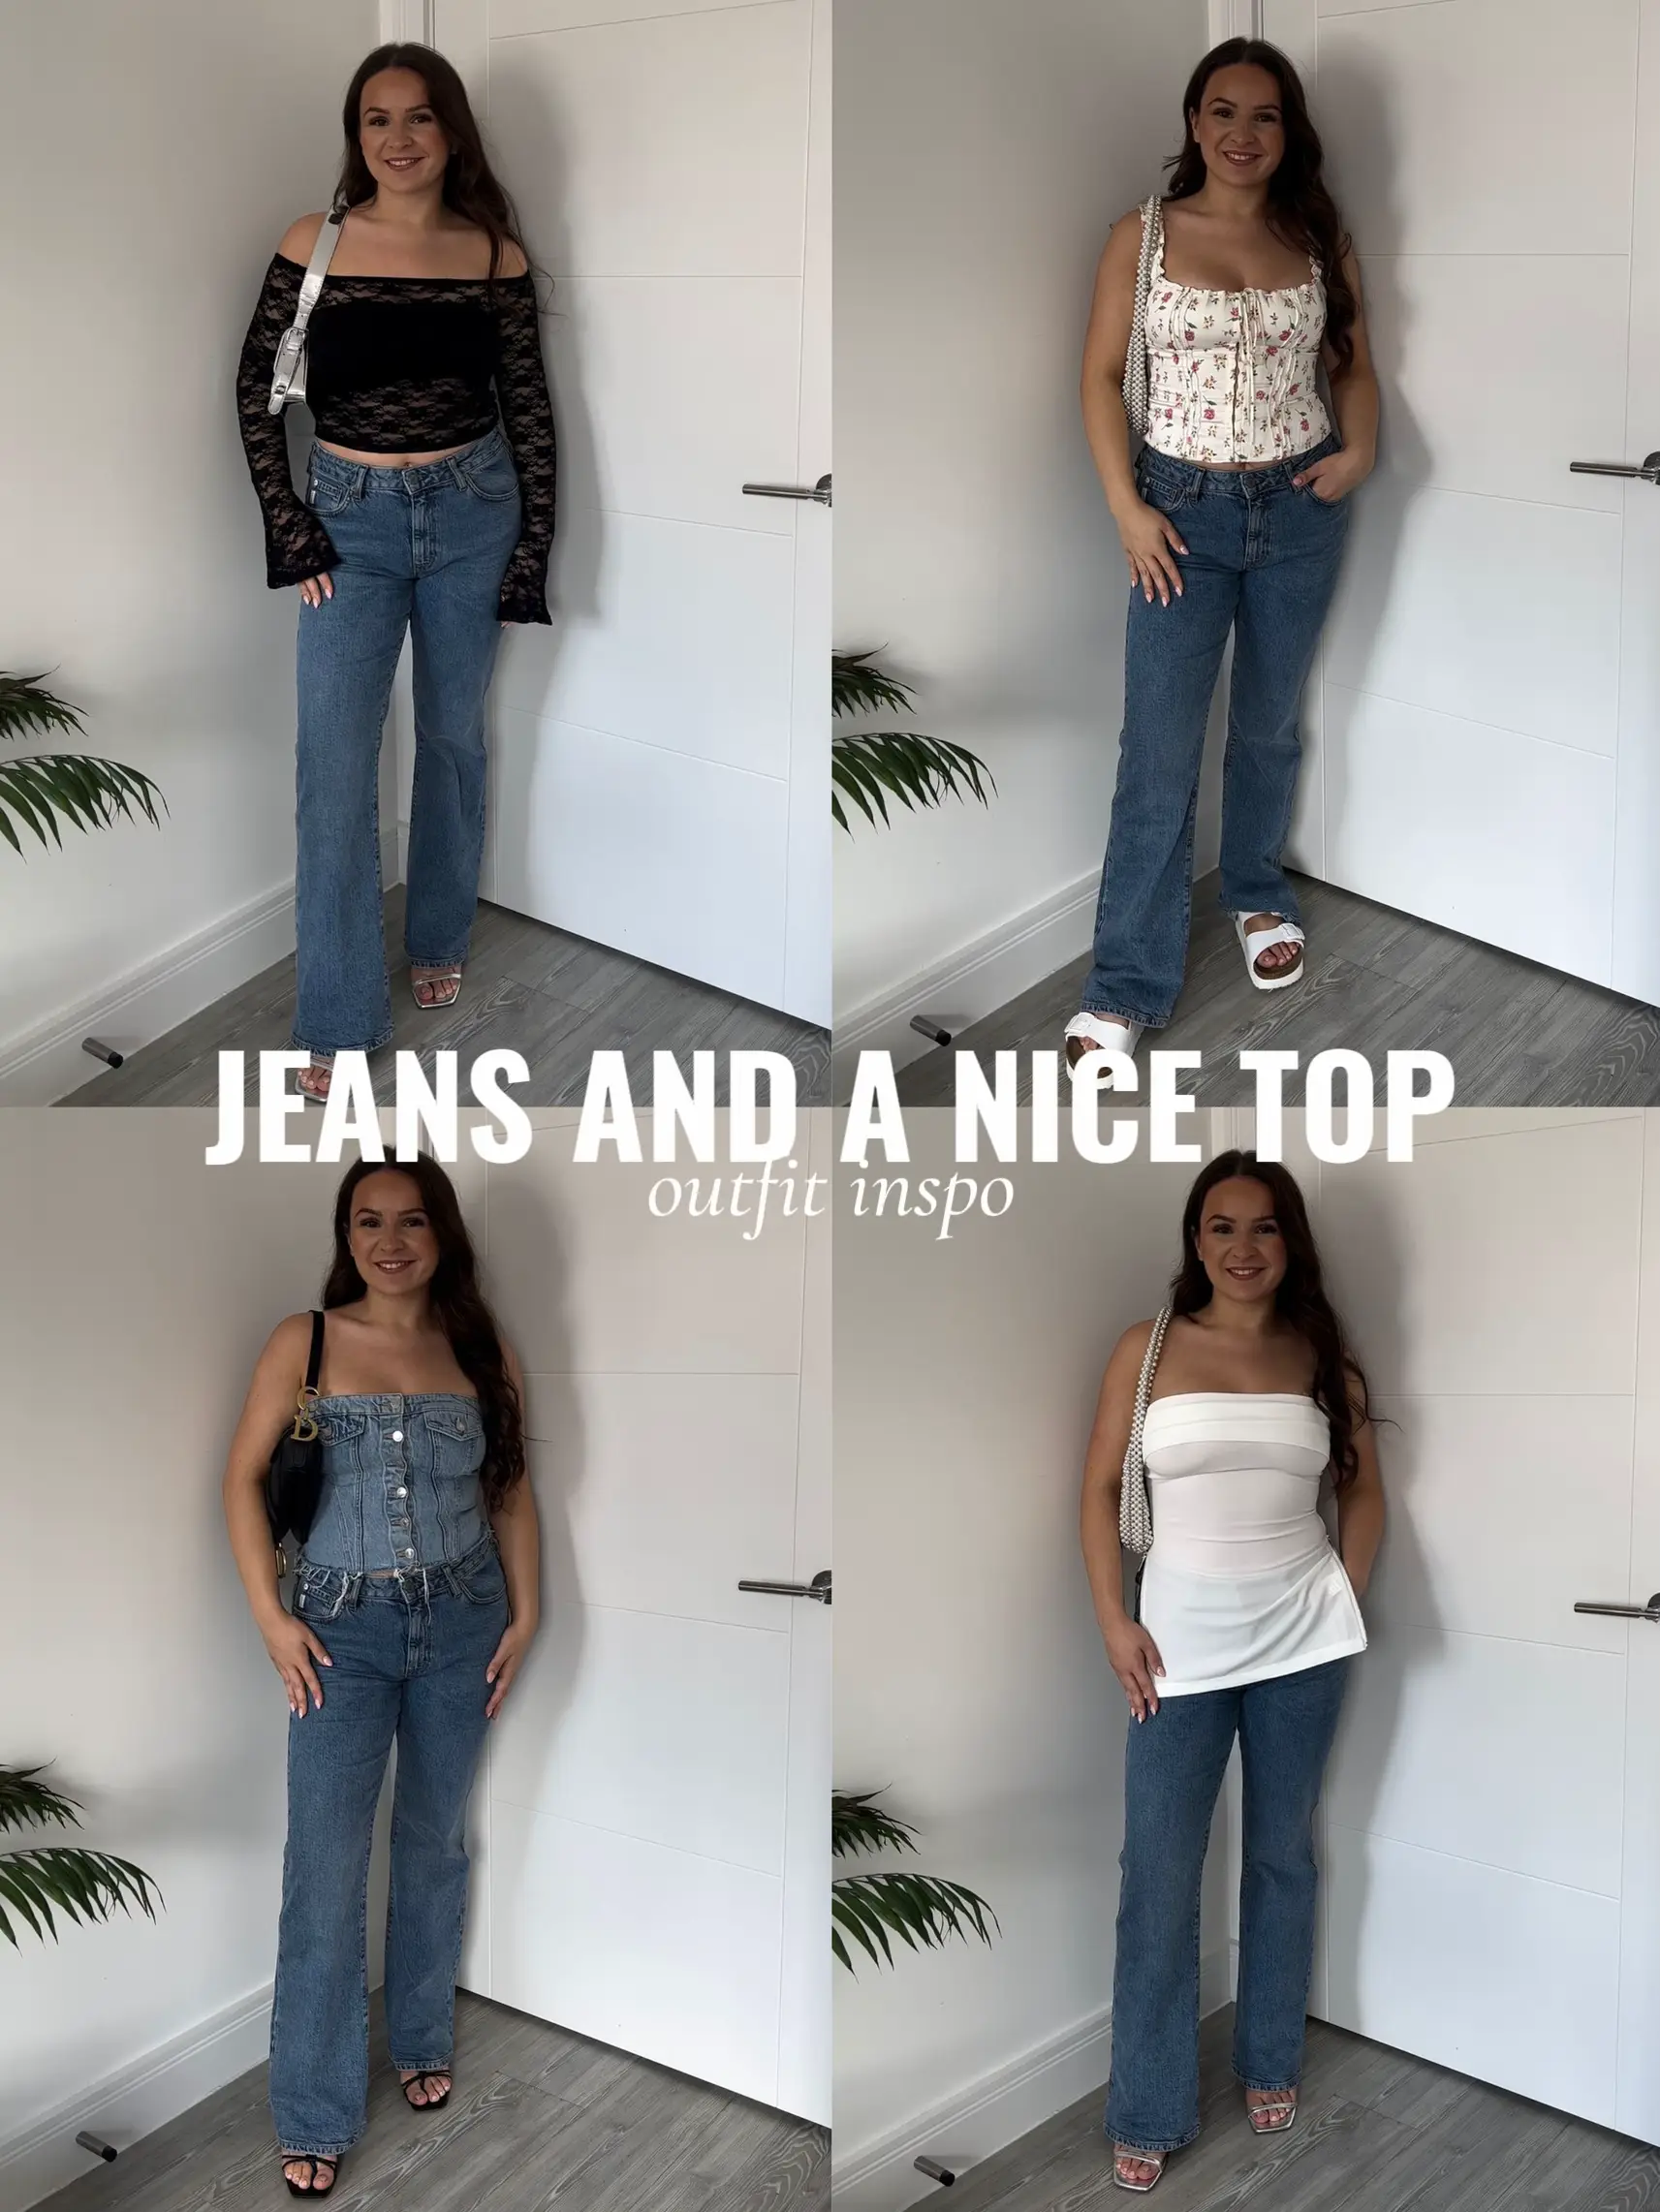 Jeans and a nice top outfit Inspo 🫶🏼 #jeansandanicetop #midsizefashi